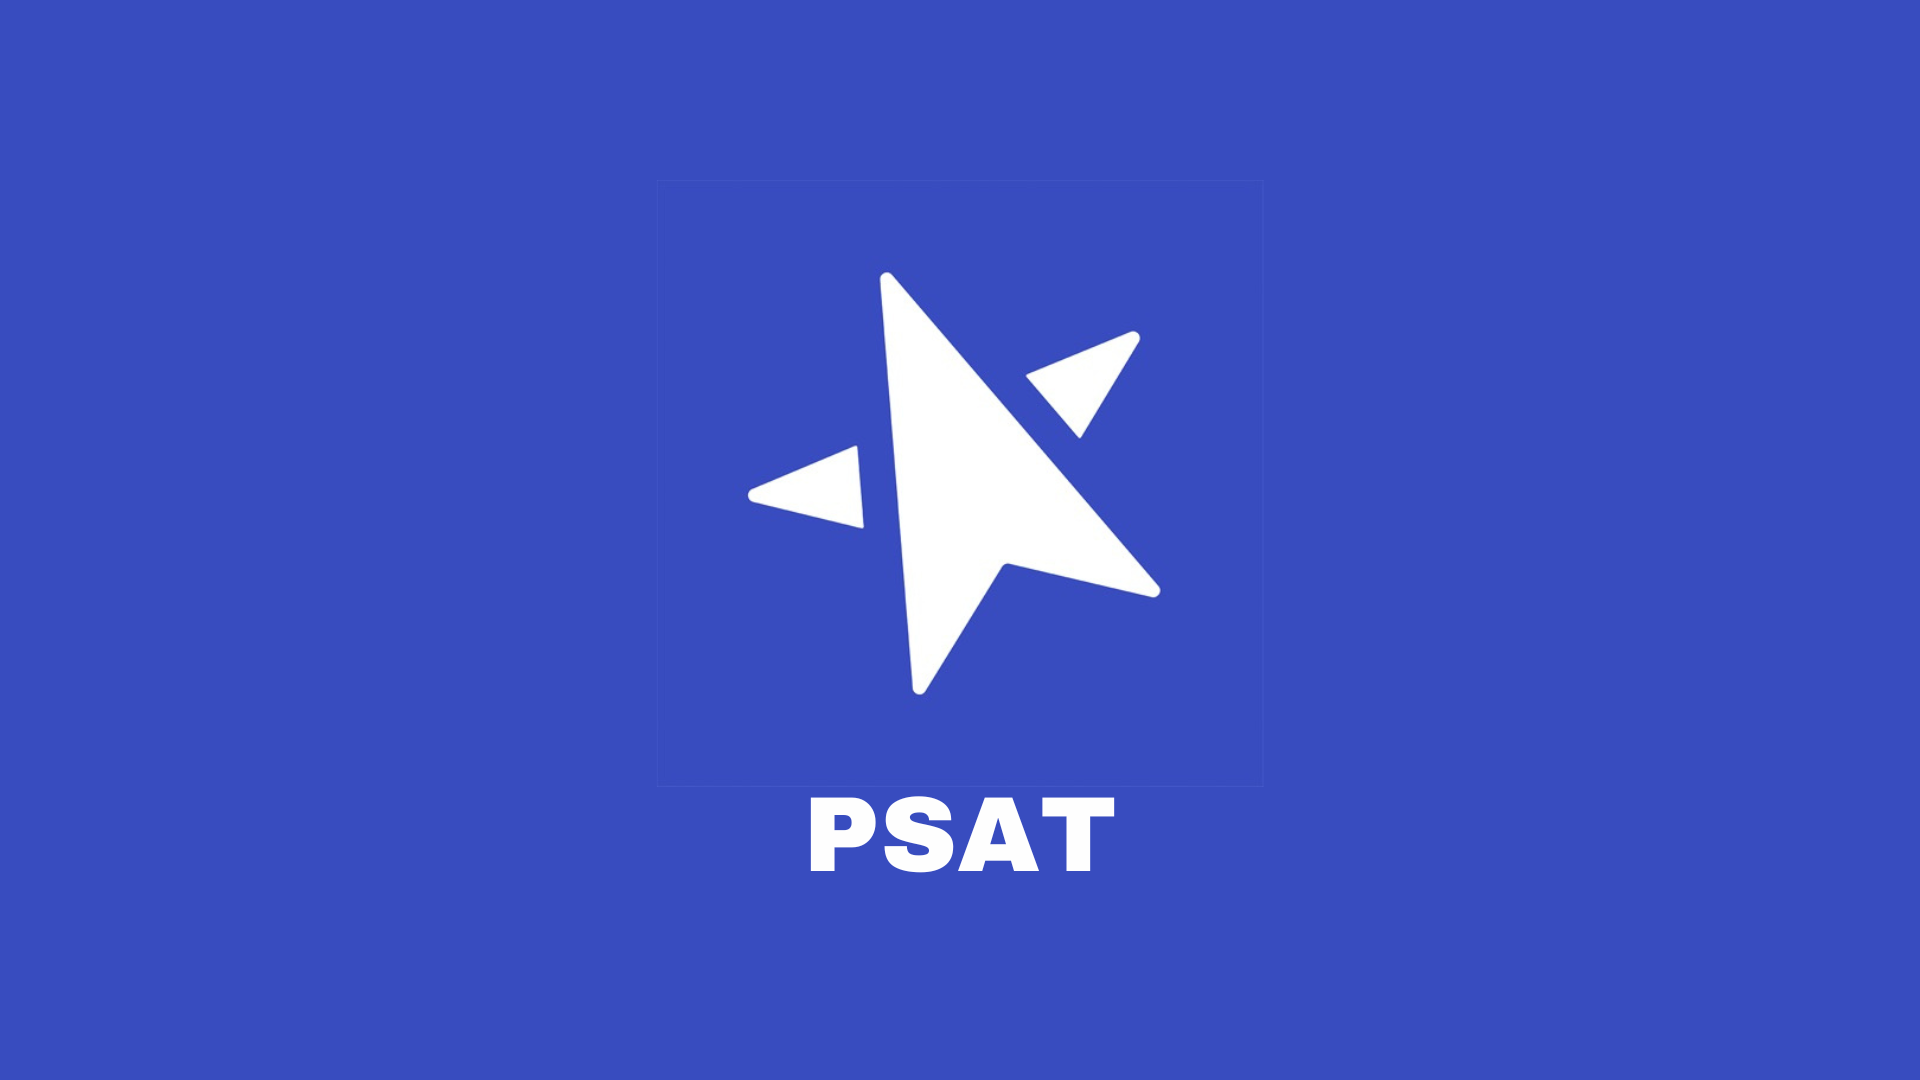 The logo for the new fangled Bluebook system: the system that runs the PSAT